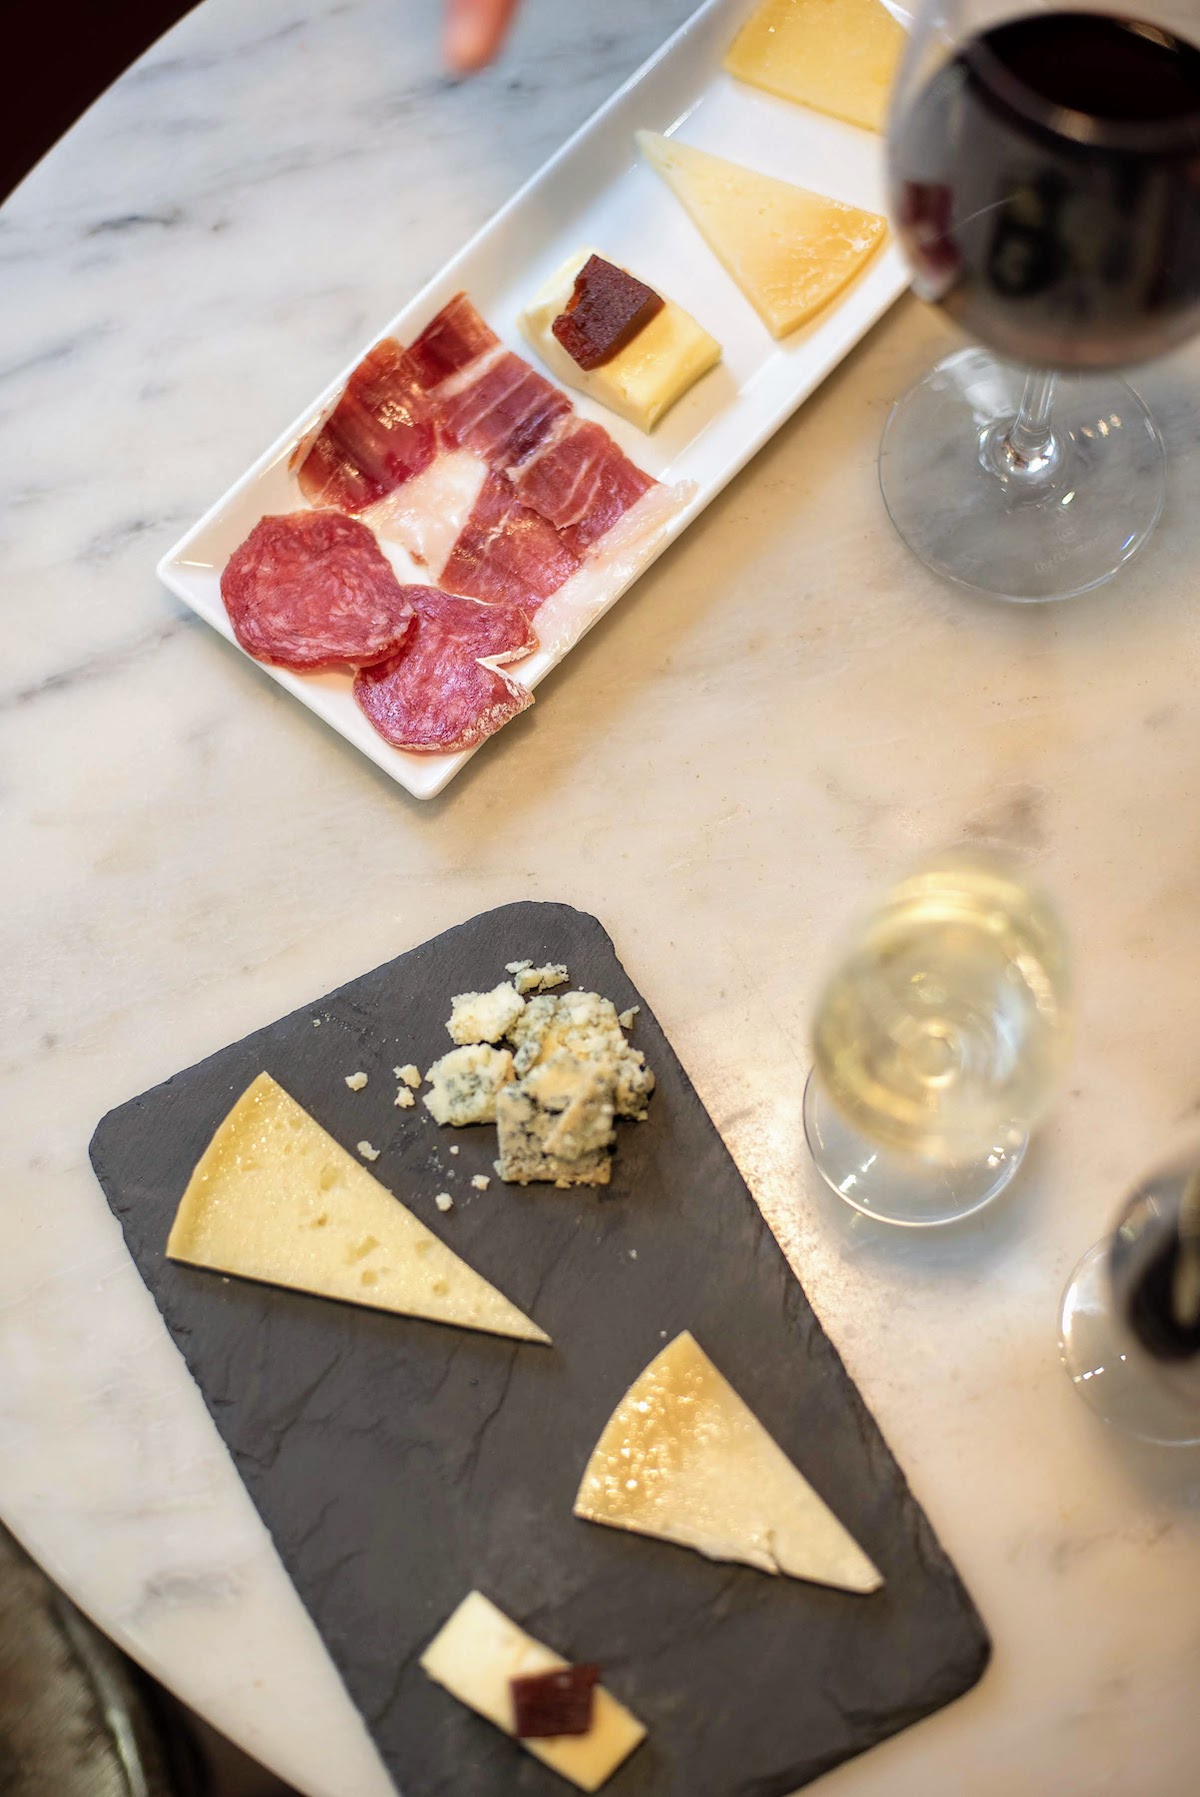 Overhead shot of two small trays of cheeses and cured meats next to a glass of red wine and a smaller glass of pale yellow sherry wine